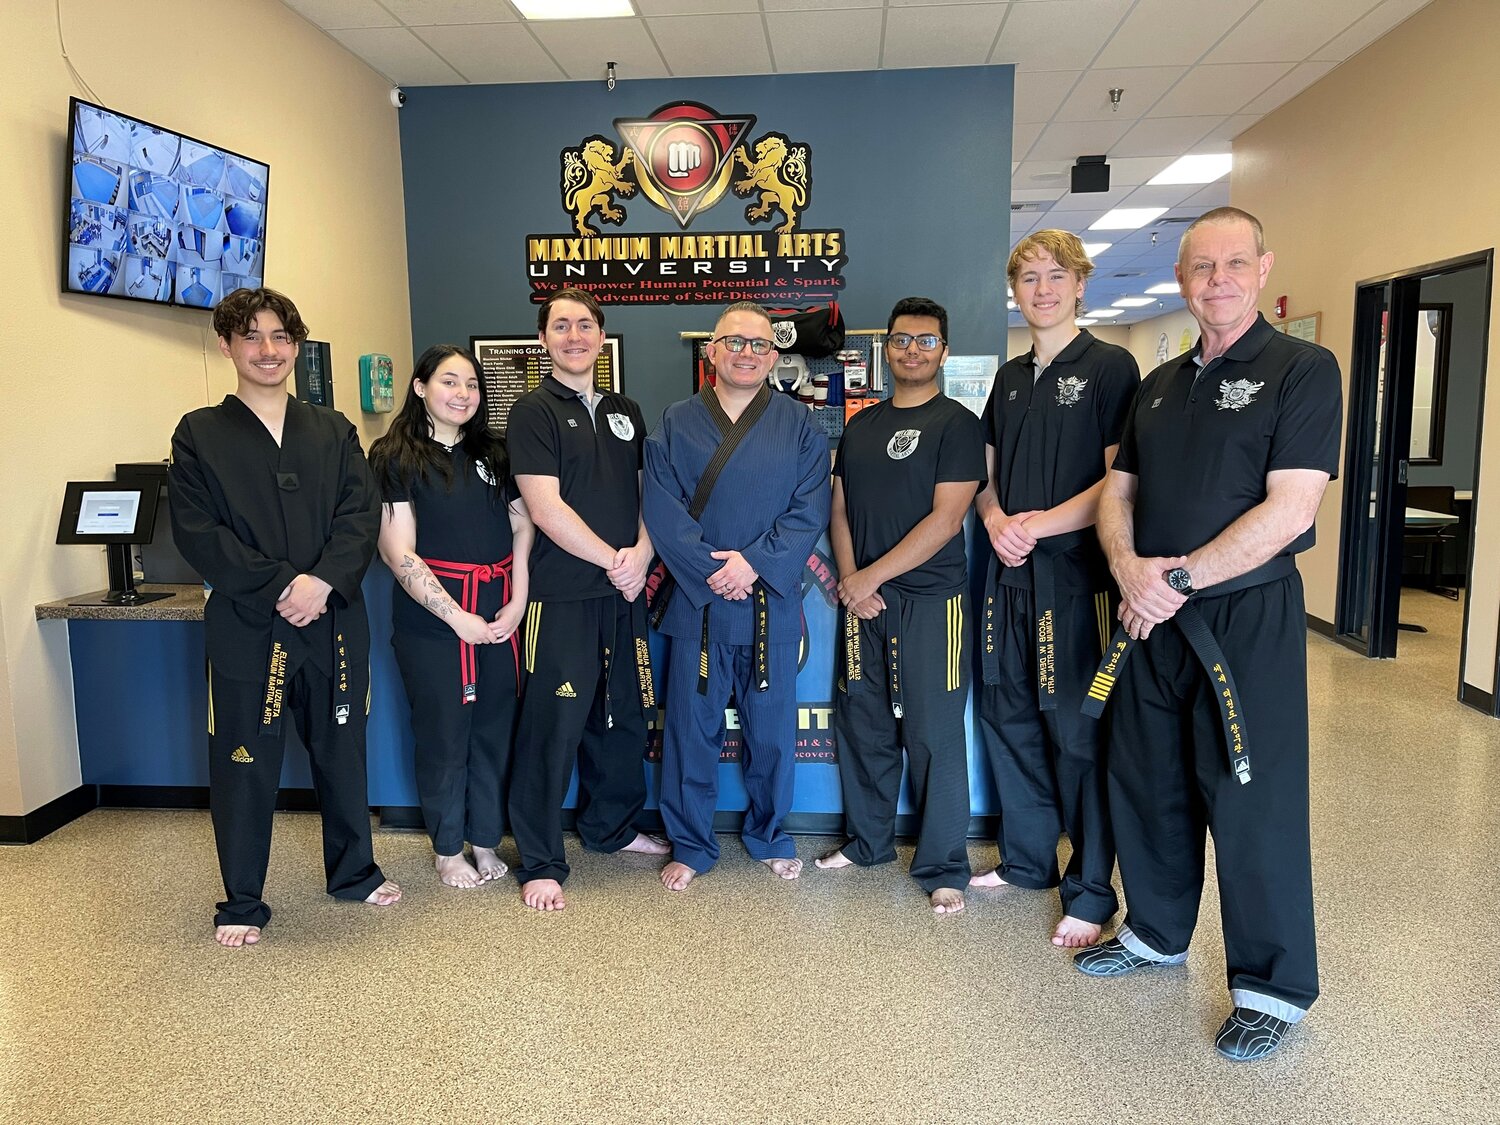 The crew at Maximum Martial Arts University works to offer a wide variety of classes and trainings.